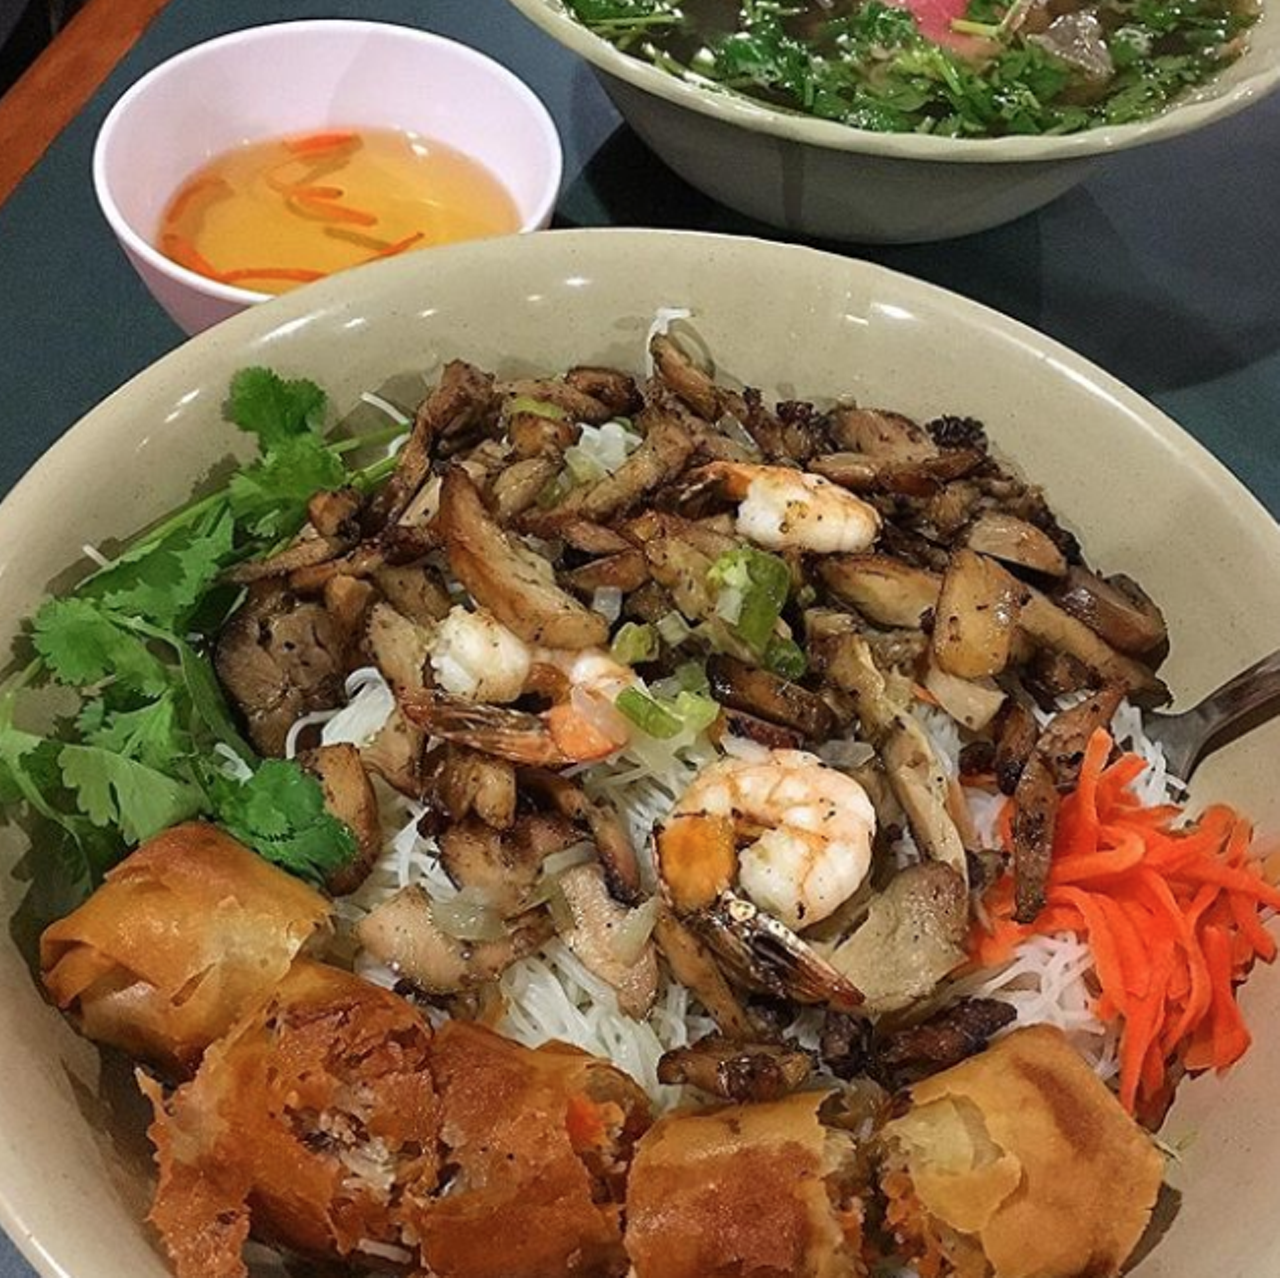 Pho Hong Phat
6180 Wurzbach Road, (210) 523-2888
This chill spot keeps it real with pho, spring rolls and other classic dishes that are solid choices for when you want some fresh flavors. Consider the Medical Center folks lucky for having this spot so close.
Photo via Instagram / minjeejou